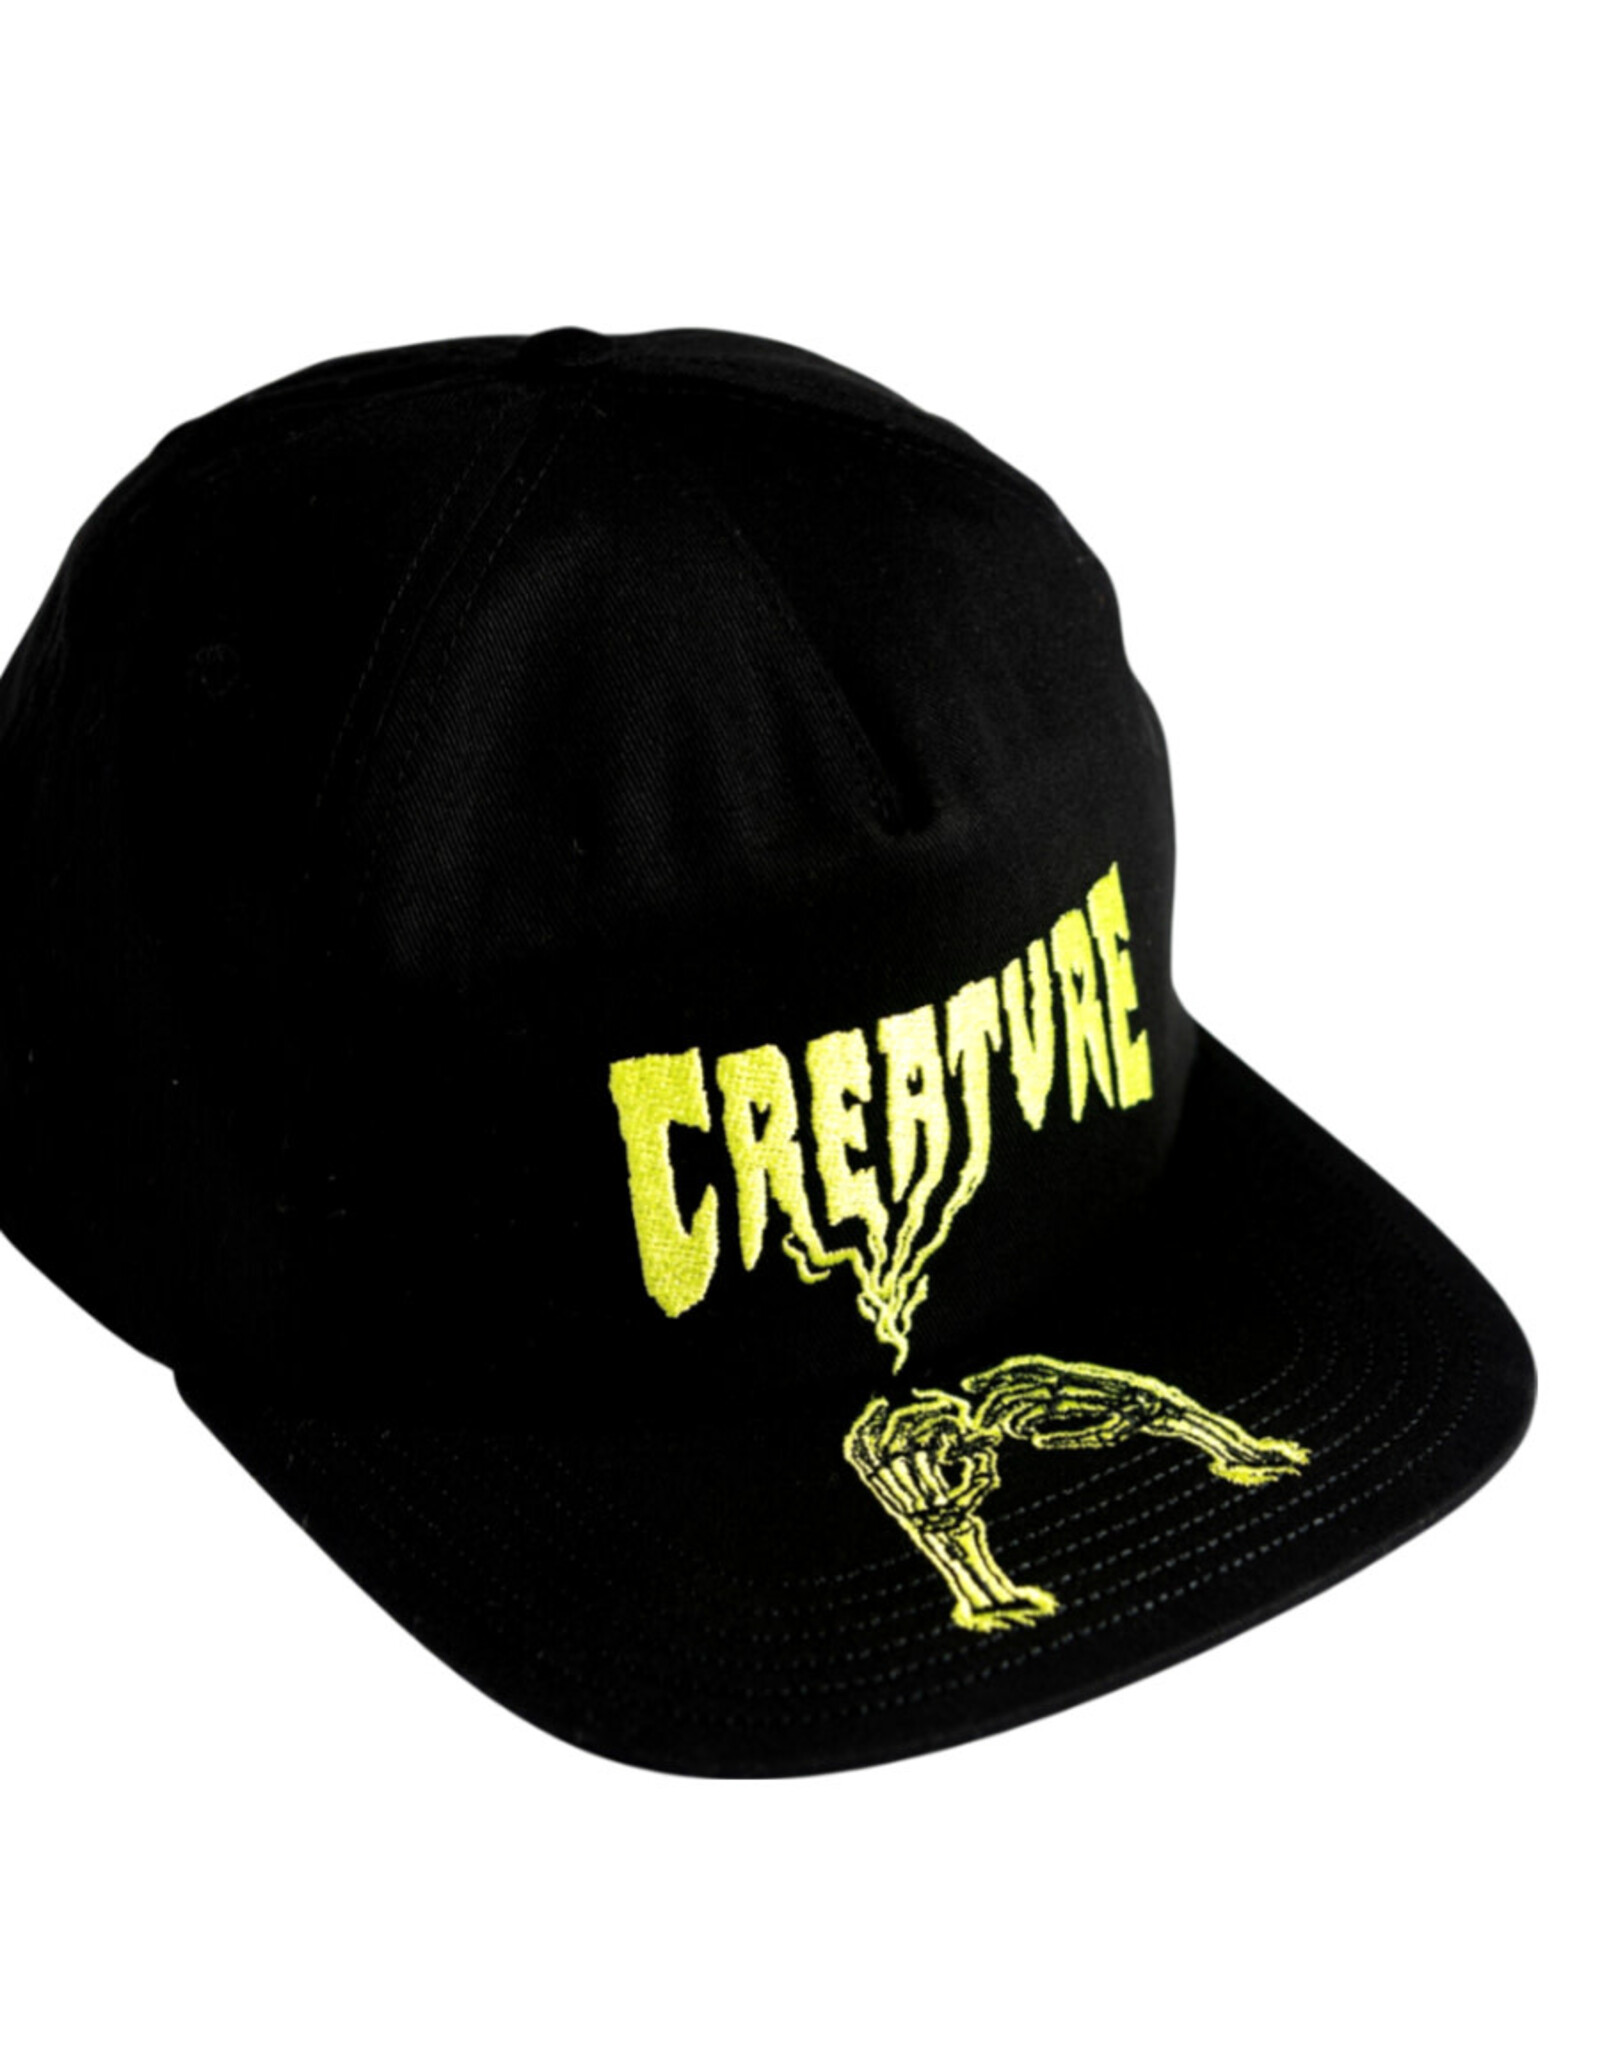 Creature Creature Hat Rolling In The Grave Unstructured Mid Snapback (Black)